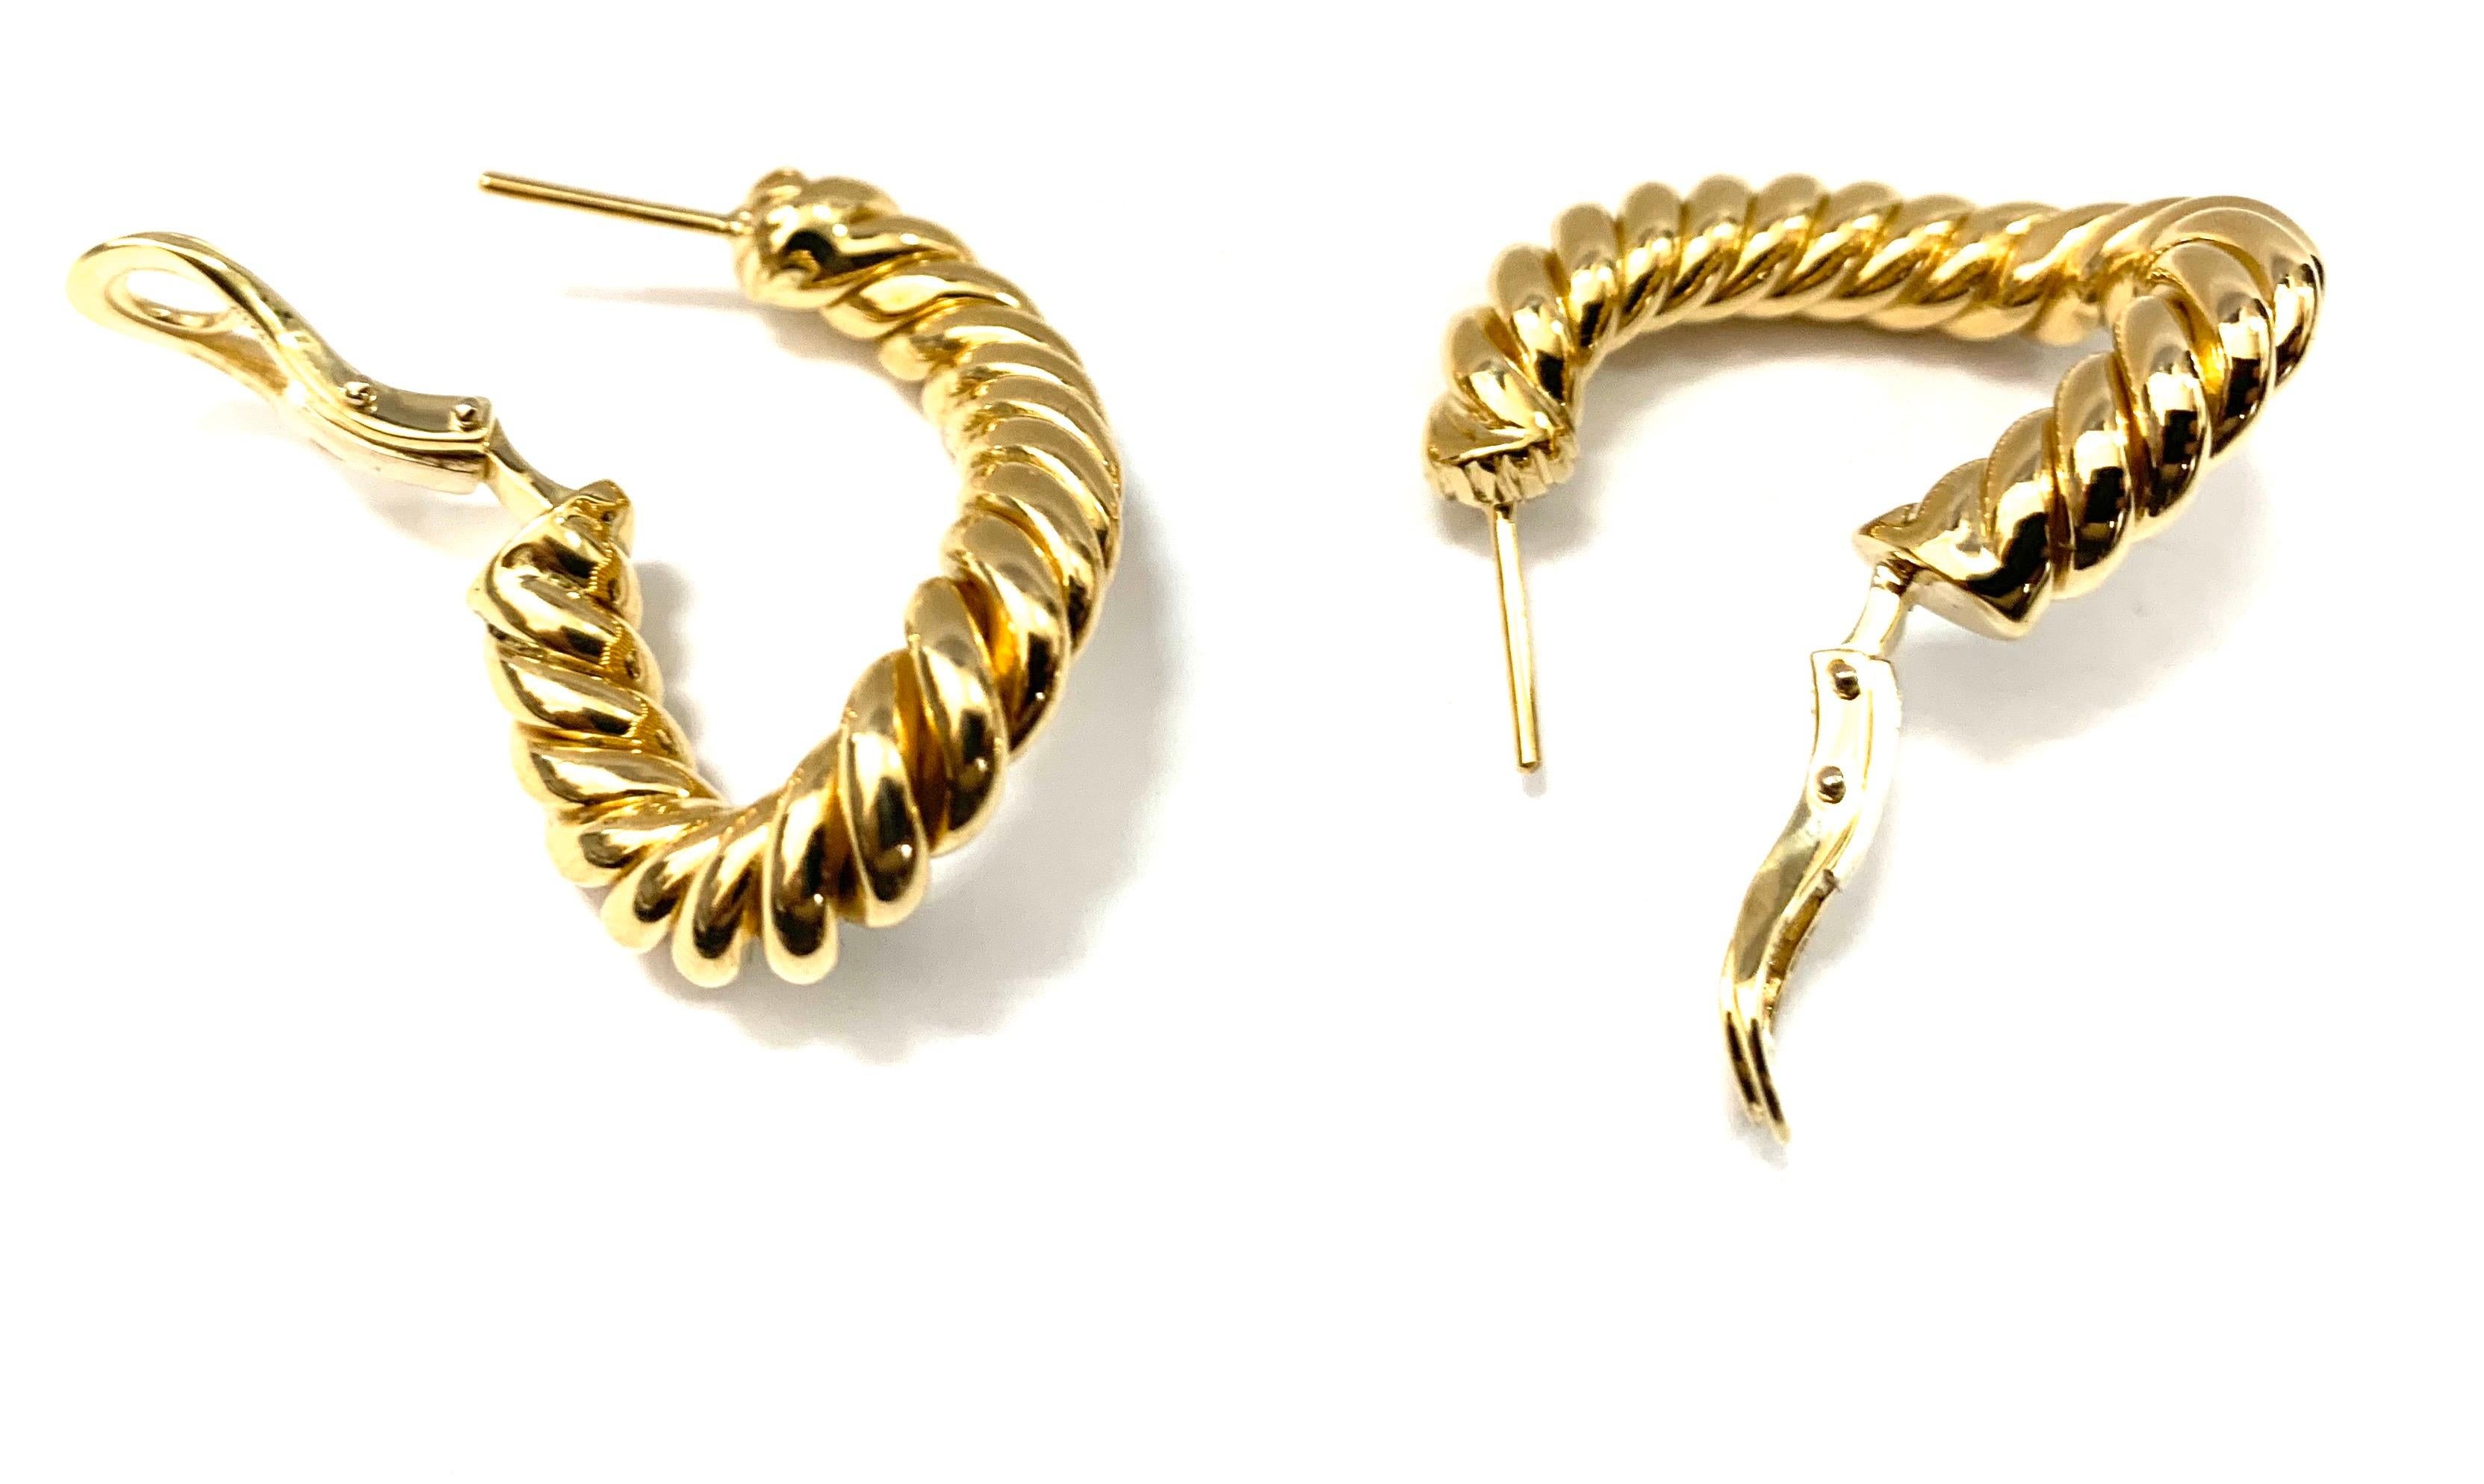 Pair of Earrings from the Collection 